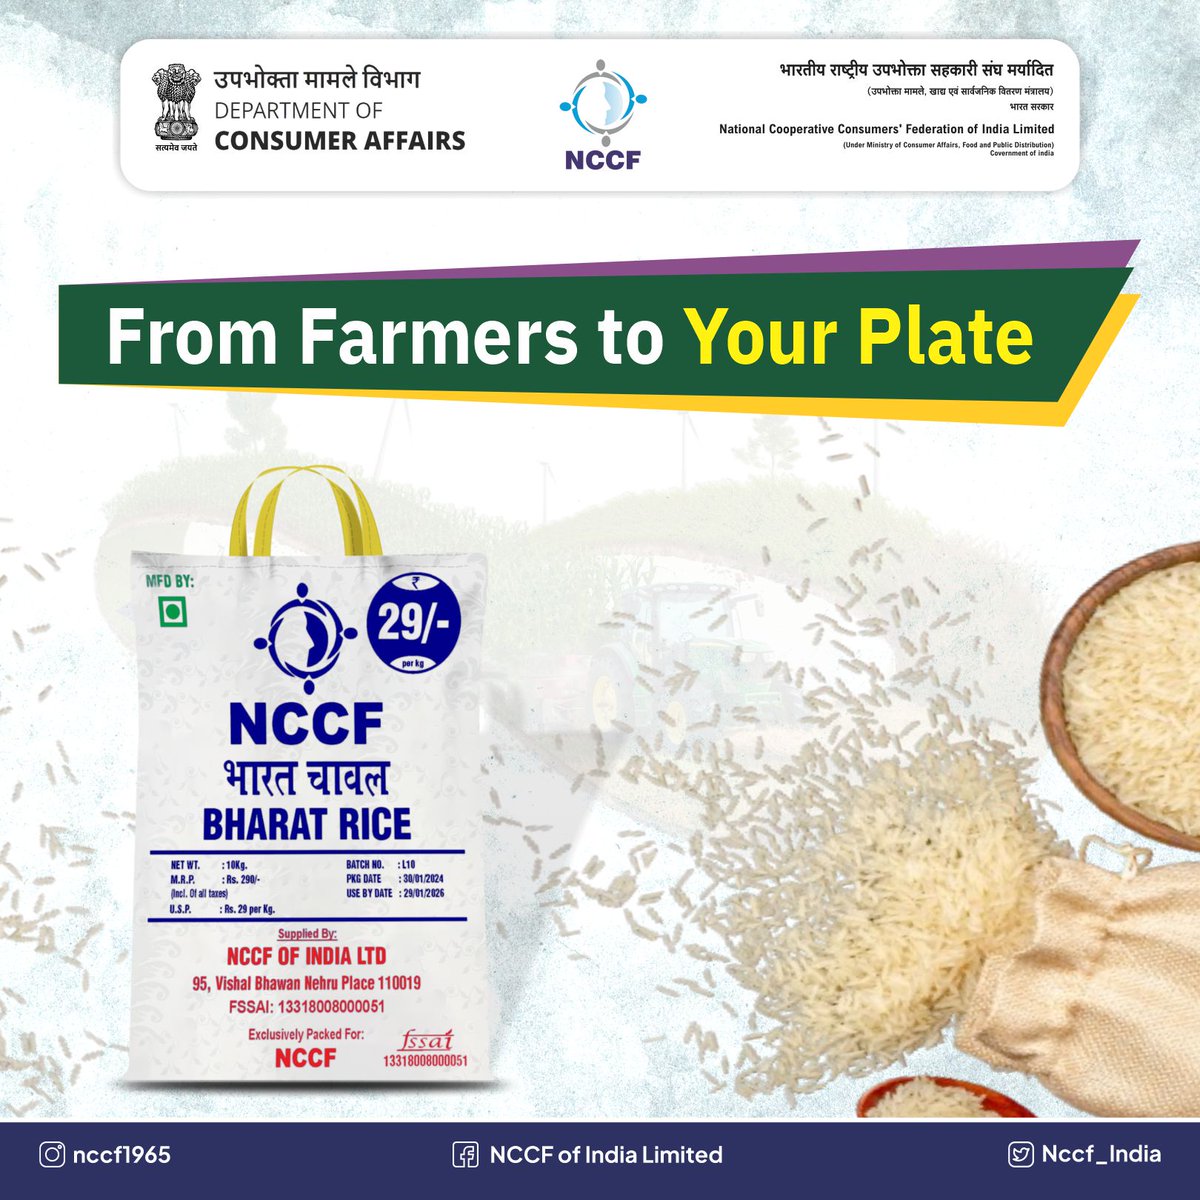 Bringing the finest grains from our farmers to your table - Bharat Rice, where quality meets taste! 🌾🍚 #BharatRice #FarmFresh #Farmers #BharatBrand #BharatRice #nccf